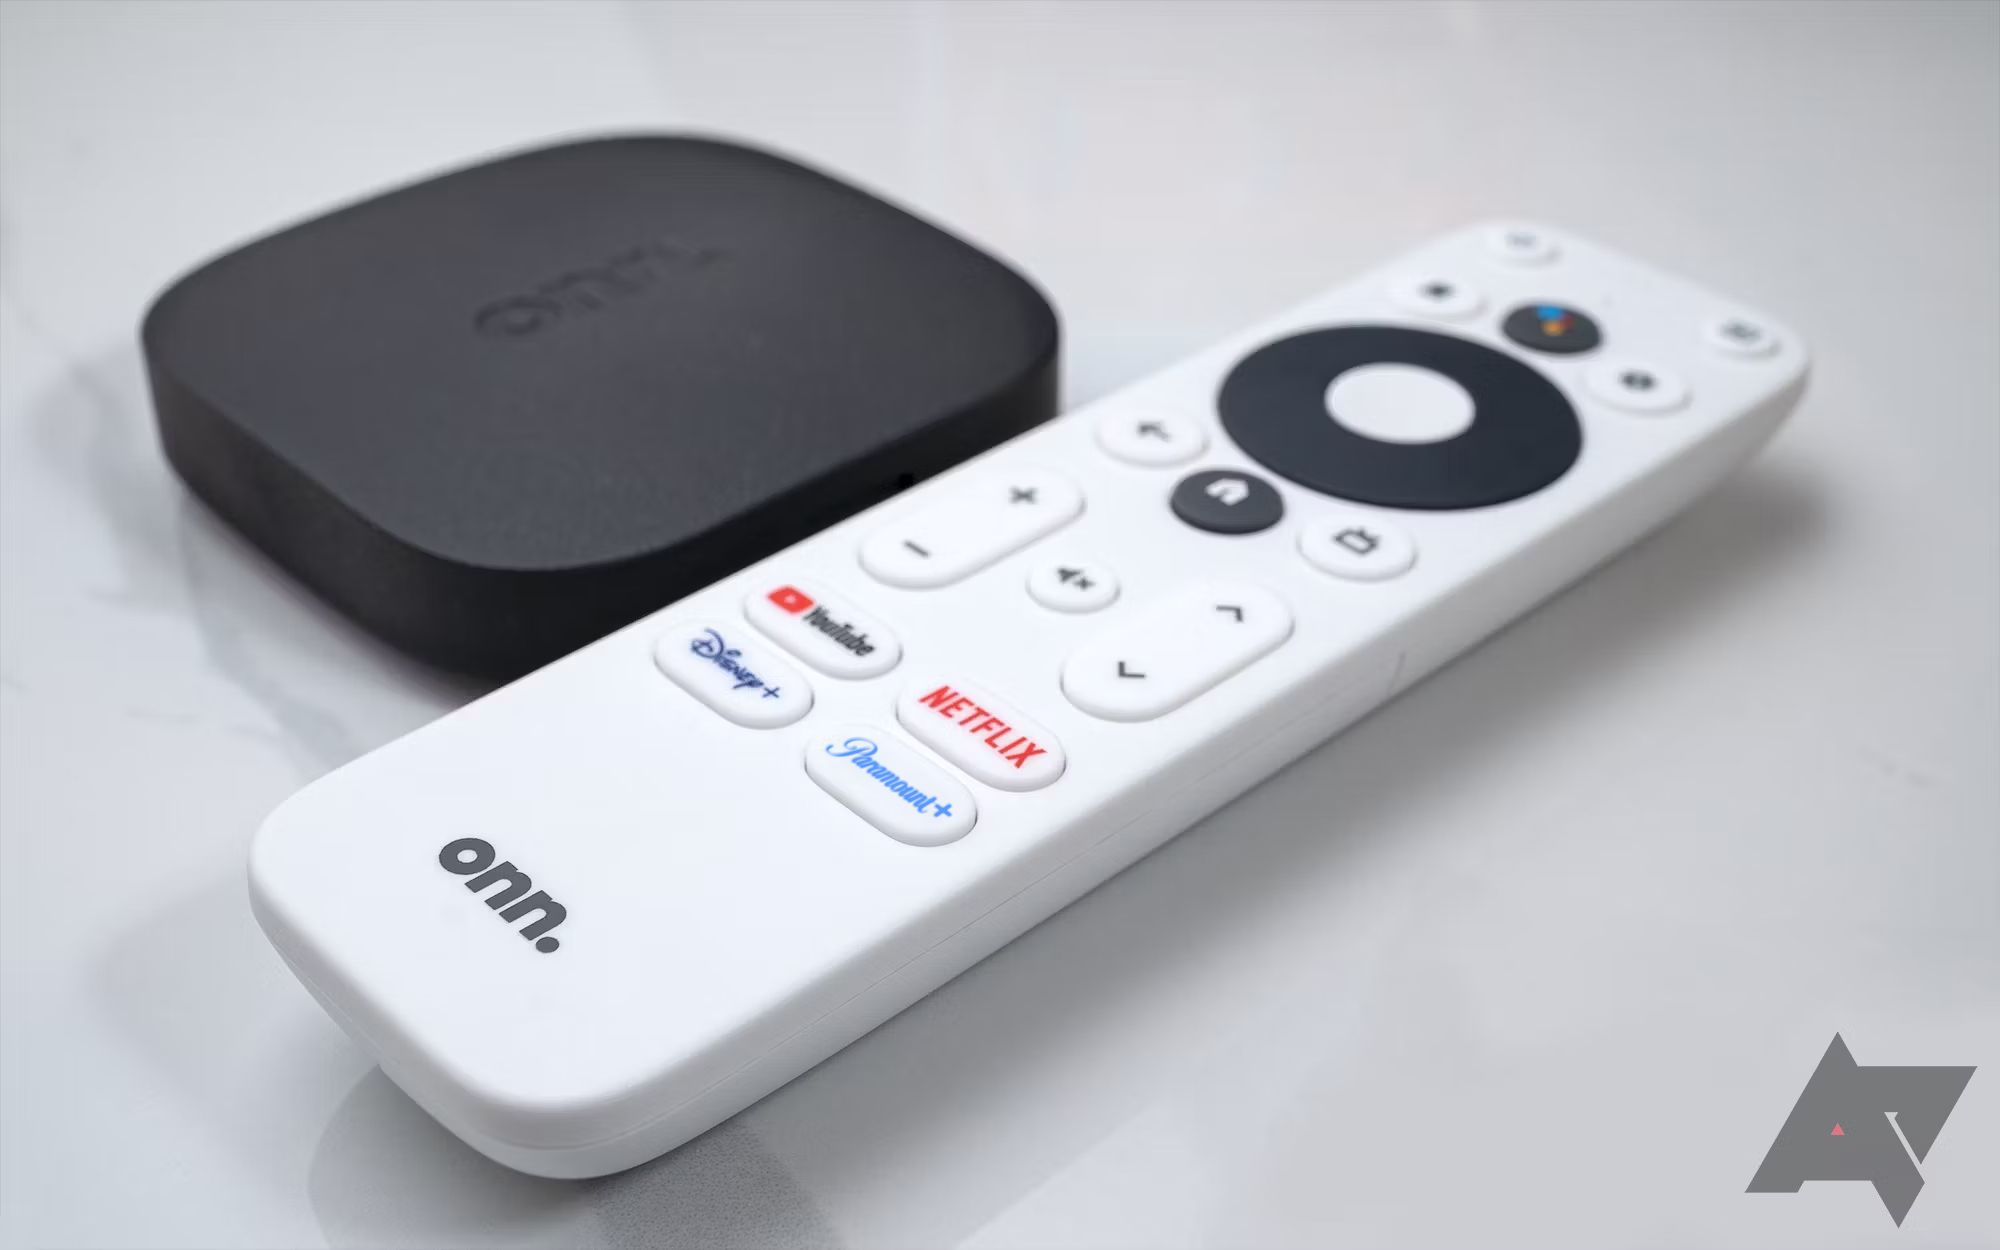 Walmart’s new $20 4K Google TV box is available for purchase